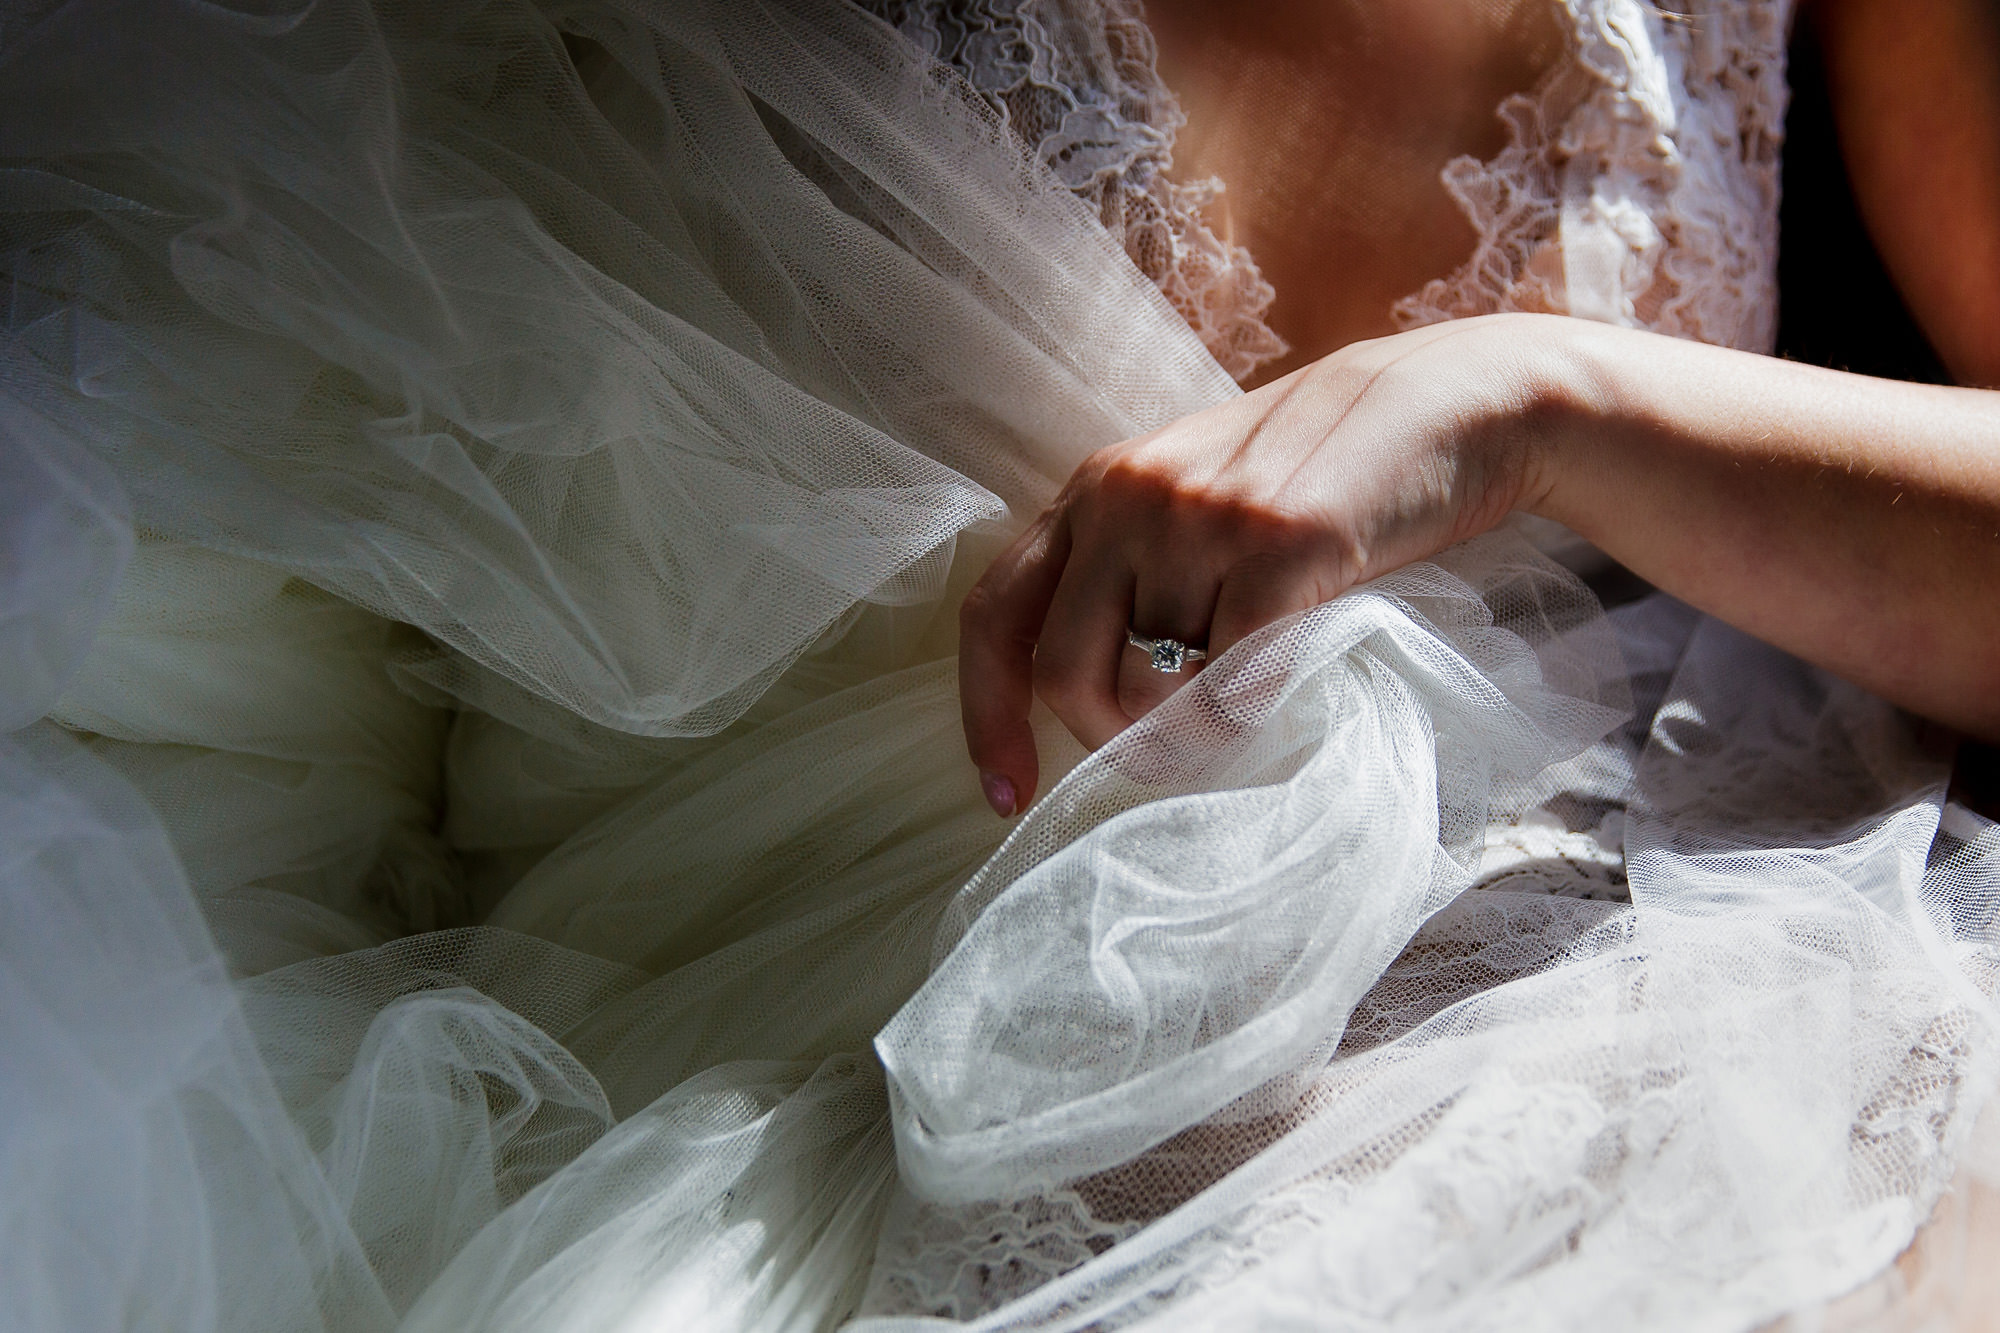 A beautifully lit photo of the bride's hand holding her wedding dress. Her engagement ring sparkles in the light.